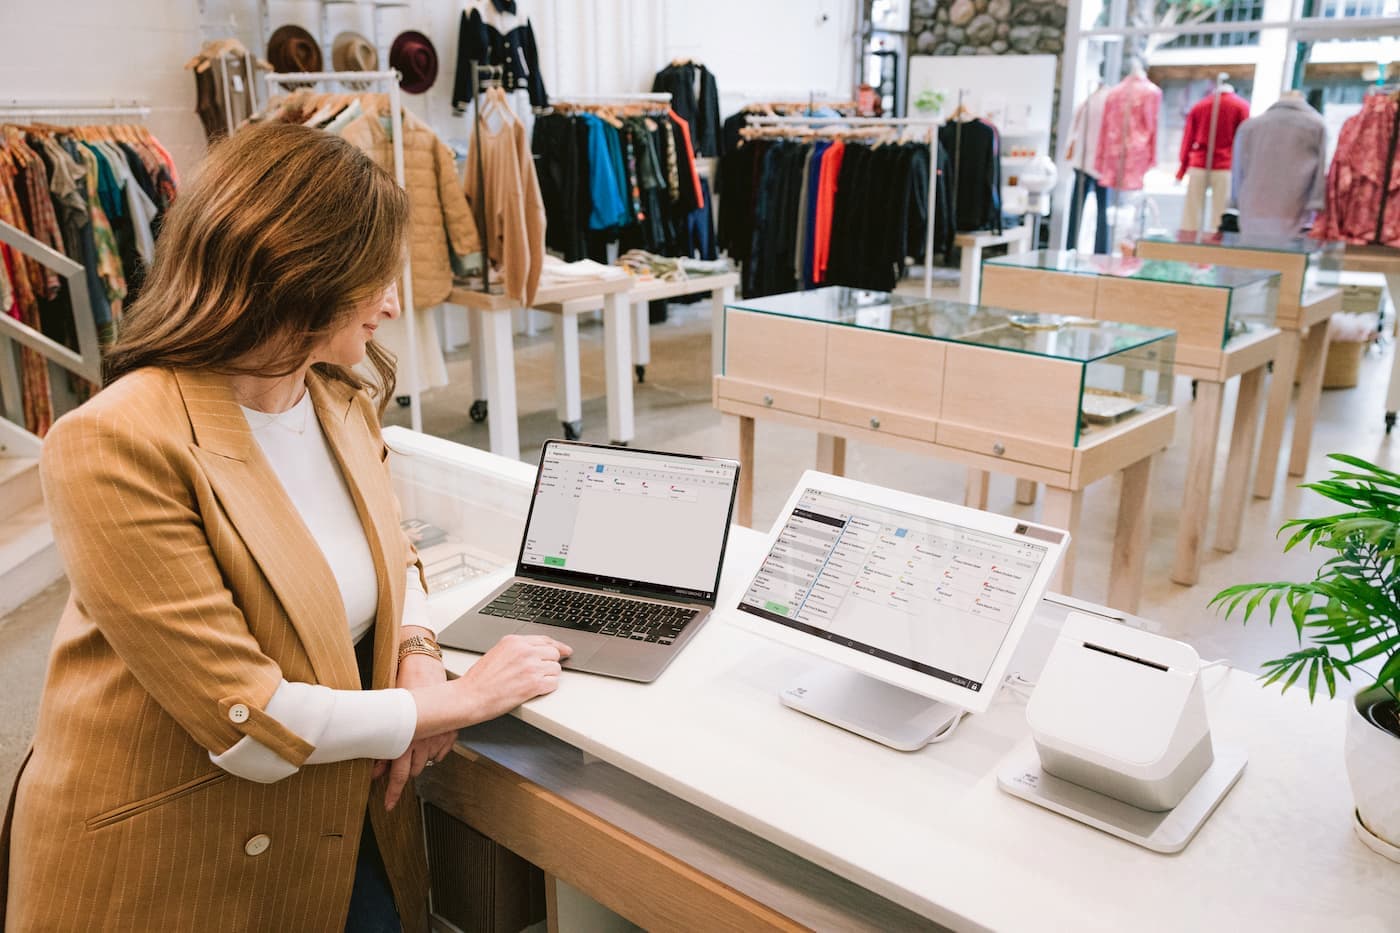 Business owner inside retail boutique using a Clover Station Duo Point-of-Sale system.